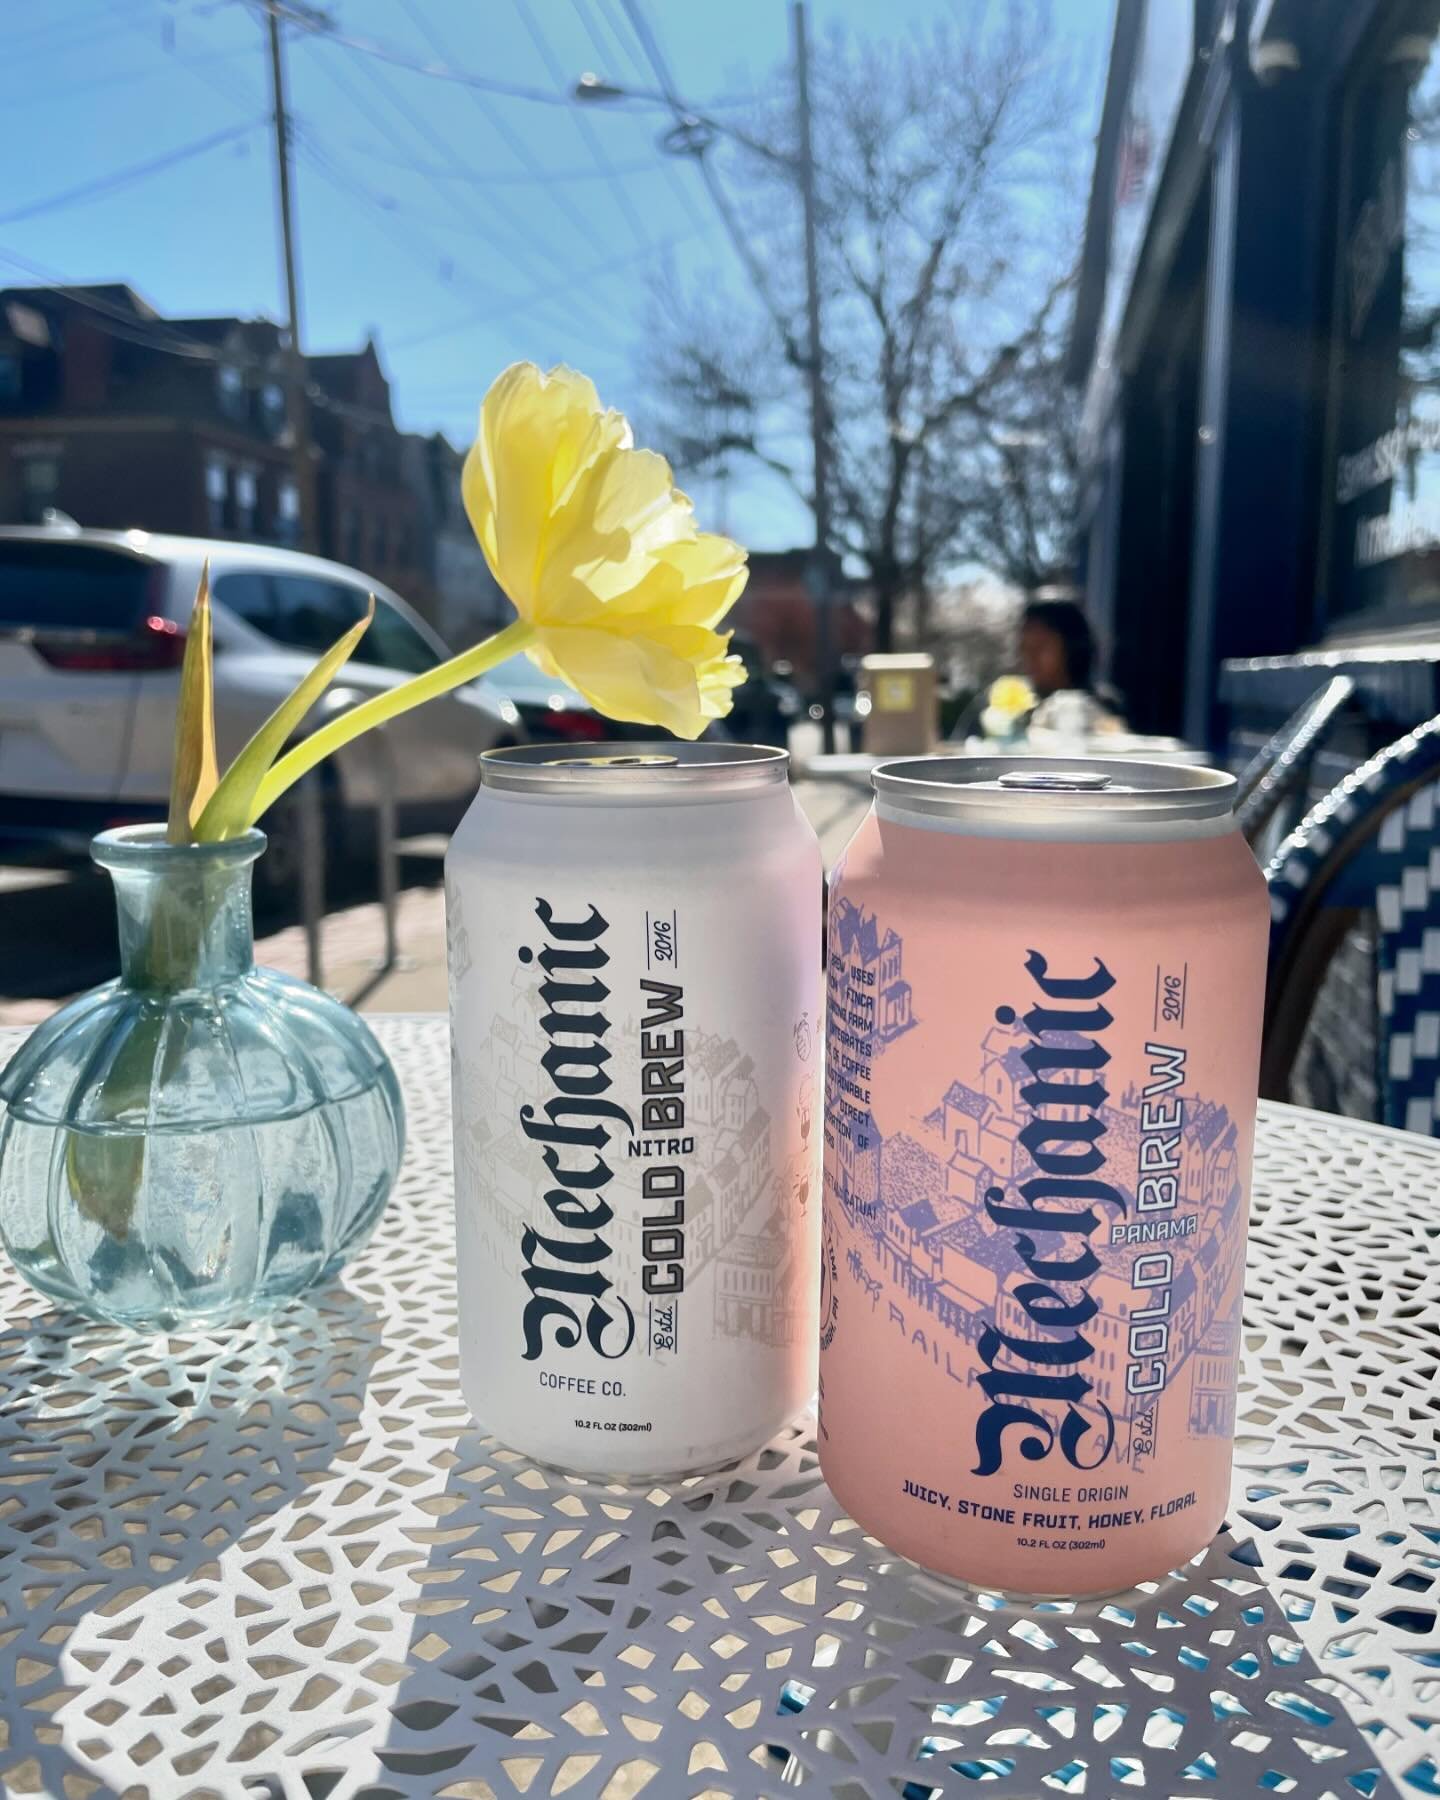 Enjoy this beautiful day at one of our outdoor tables with an icy cold @mechanic__coffee canned cold brew ☀️ 

#coldbrew #shadysideeats #pittsburghfoodie #pghbakery #pittsburghcoffee #supportlocal #shadysidecafe #pittsburghbrunch #pghcafe #localflavo